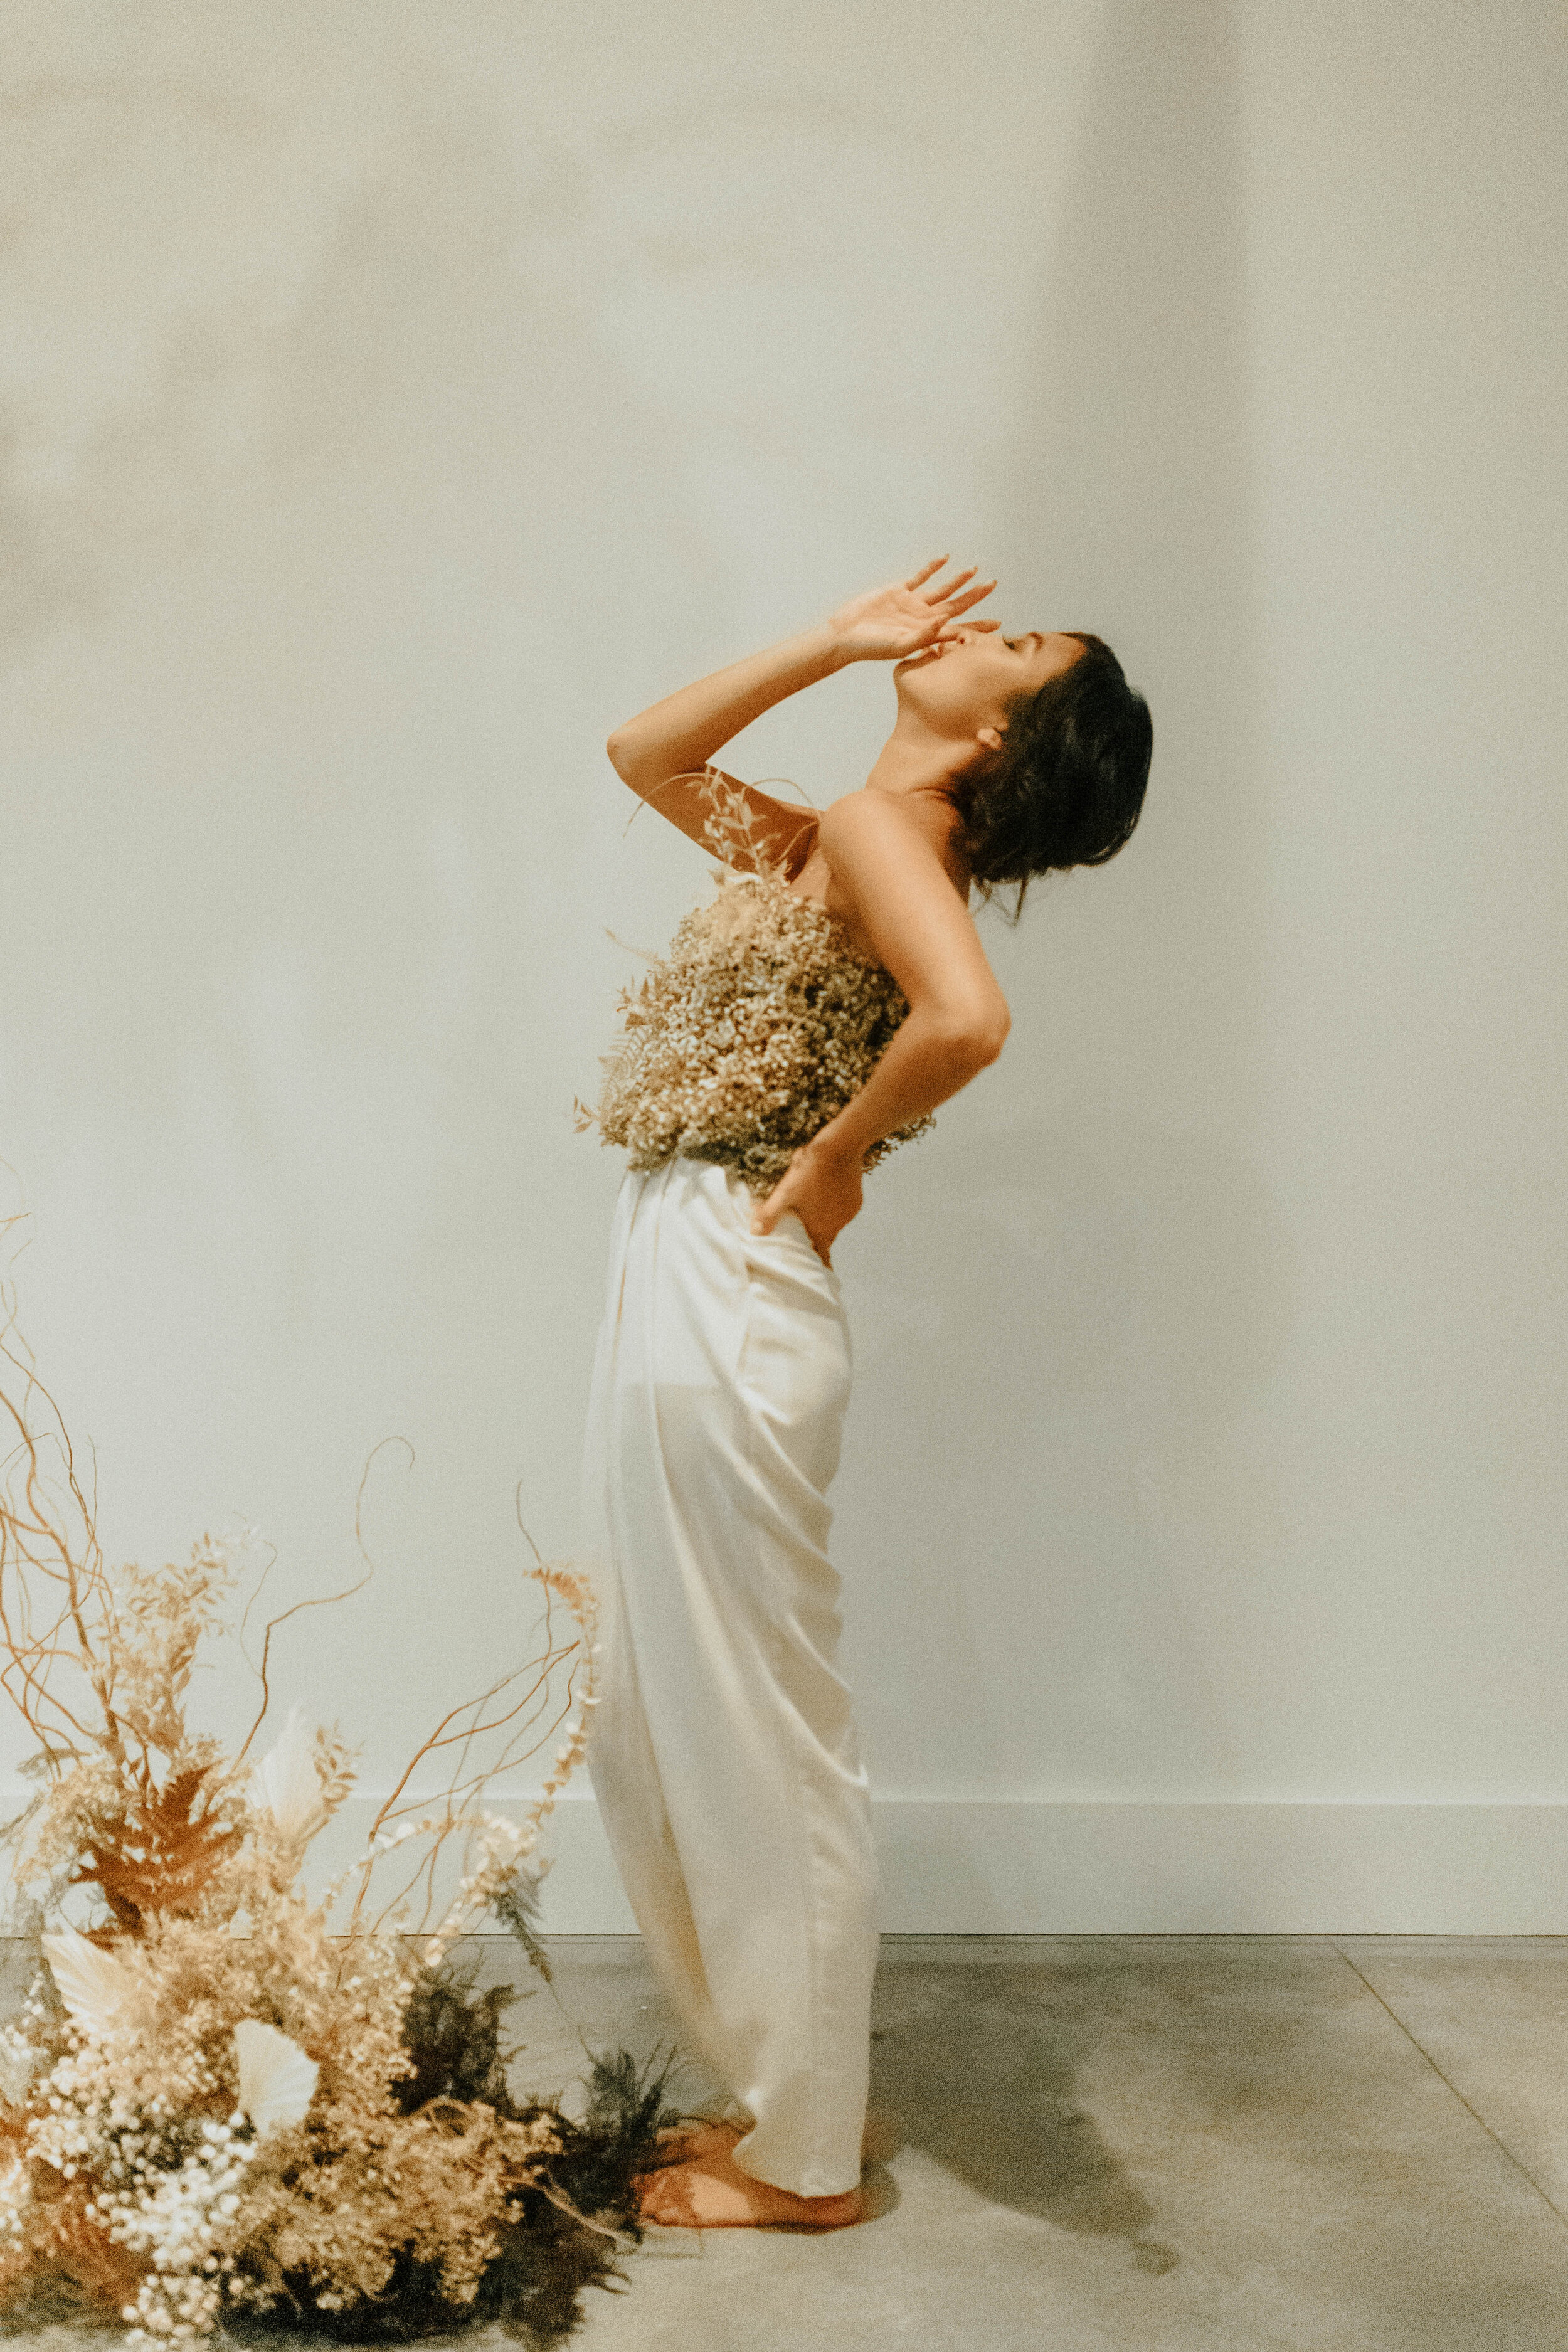 Earth tone floral design with shirt made of flowers - dyed baby’s breath. Nashville wedding florist at the Saint Elle.